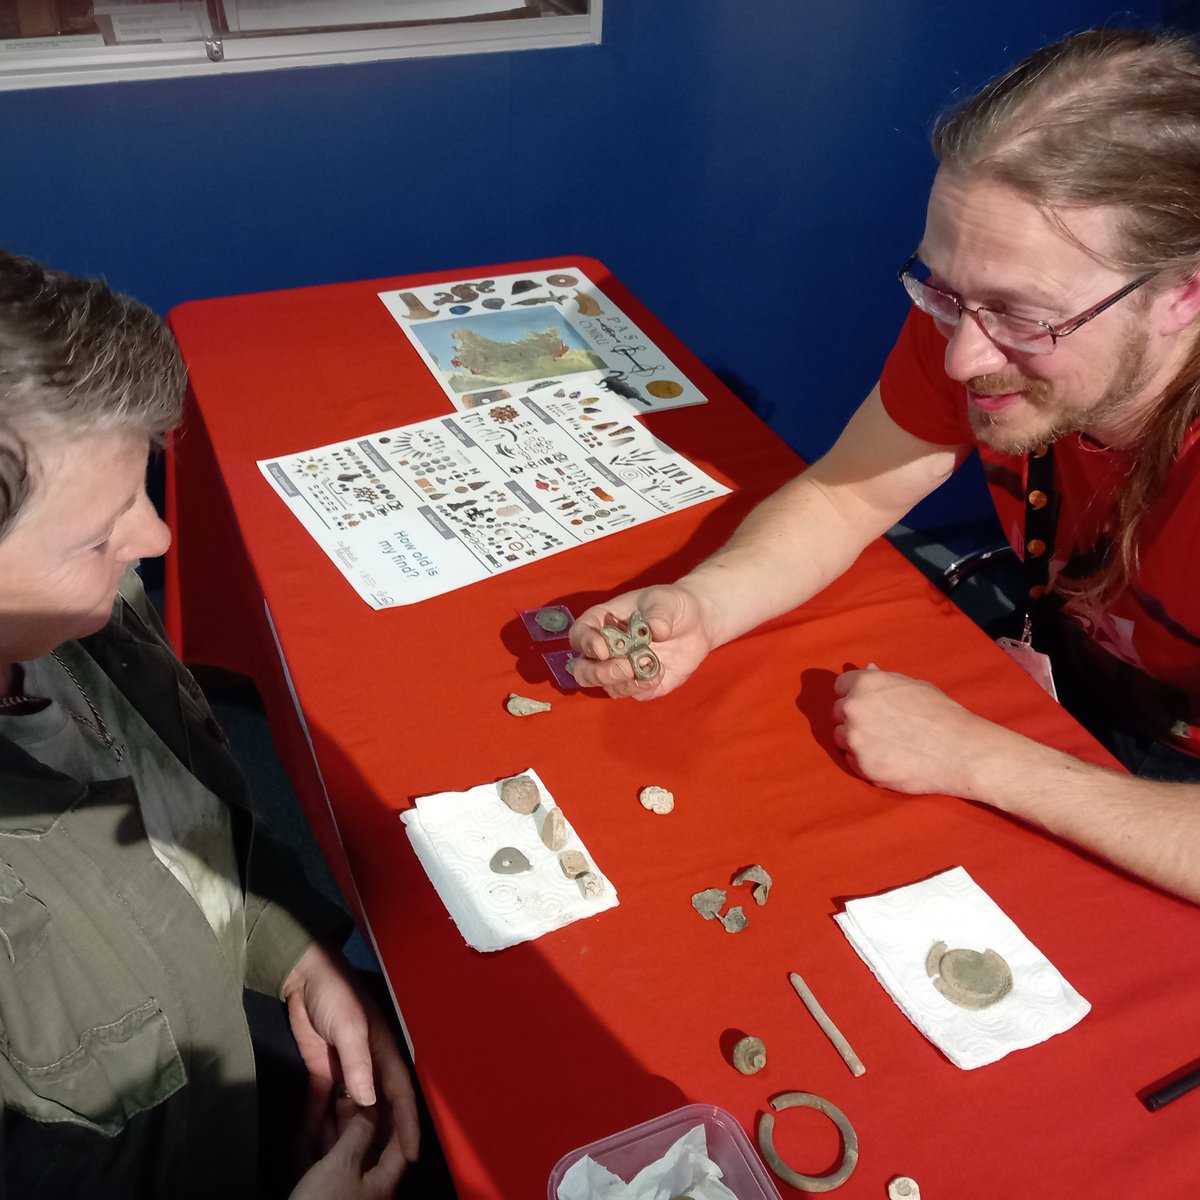 First chance to post! 

#PASCymru is in @NewportMuseum today, discussing the work of the #PortableAntiquitiesScheme. Local finders have been sharing lovely materials, including a glorious little Iron Age piece, a privilege to hold it. 

#archaeology #metaldetecting @findsorguk